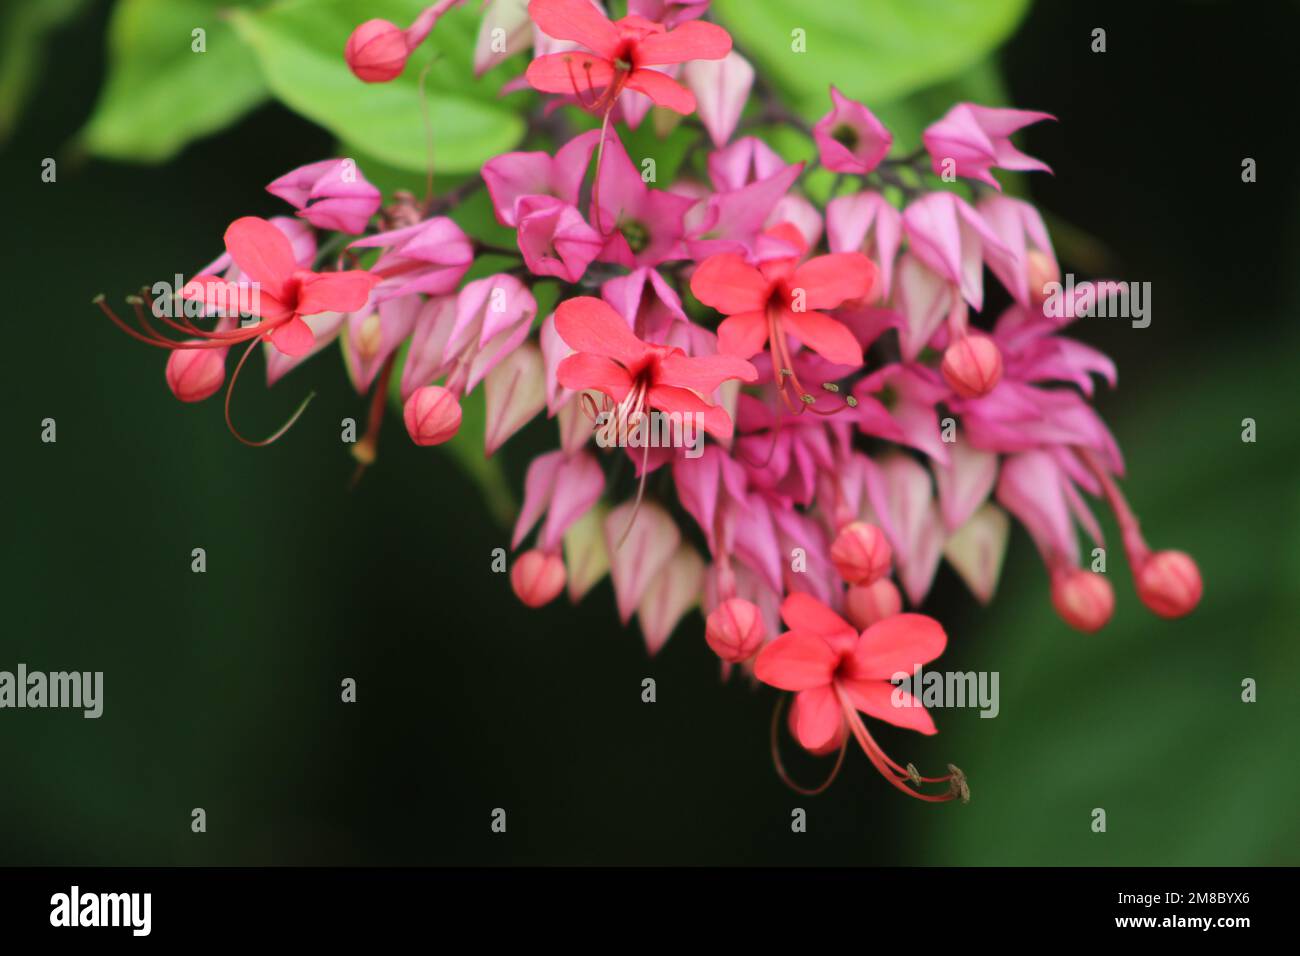 A close-up shot of Clerodendrum growing in a garden Stock Photo